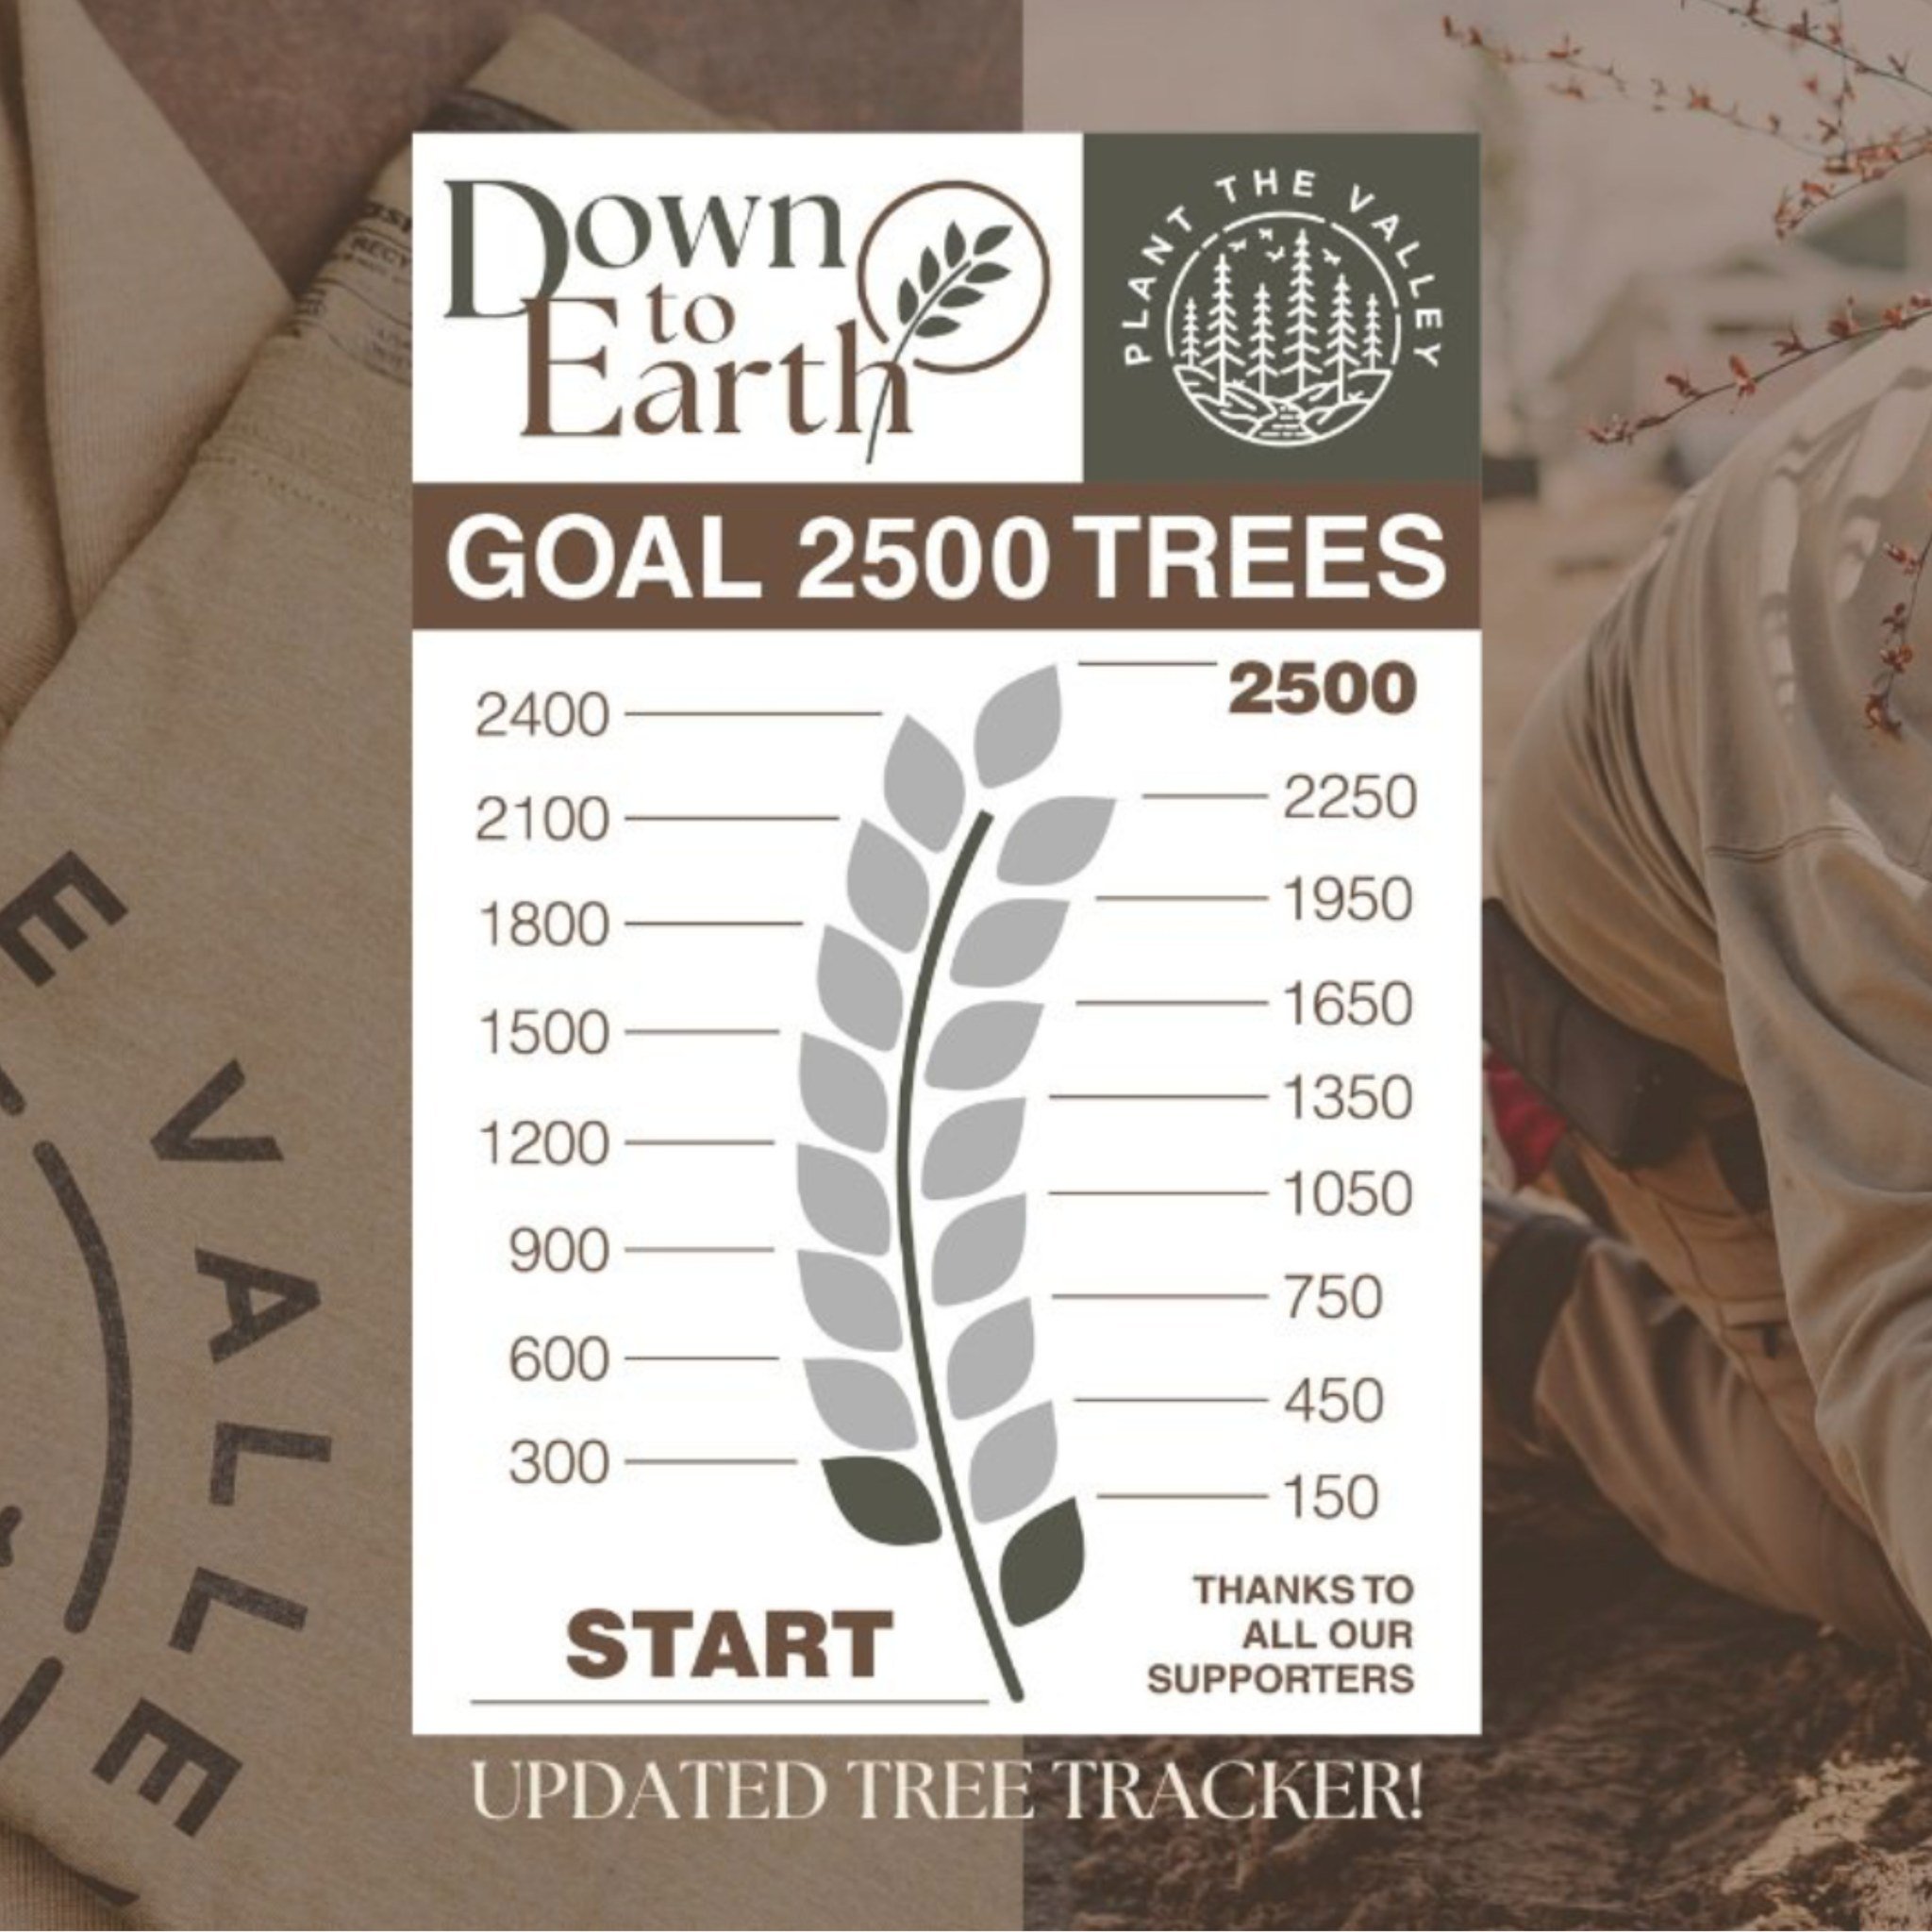 Our Plant the Valley Tree Tracker has been updated! We are up over 325 trees sold, woohoo!! 🌳

Thank you for your support as we climb our way closer to our goal!

Check out our Blog Post to learn more about our Plant the Valley Campaign and how you 